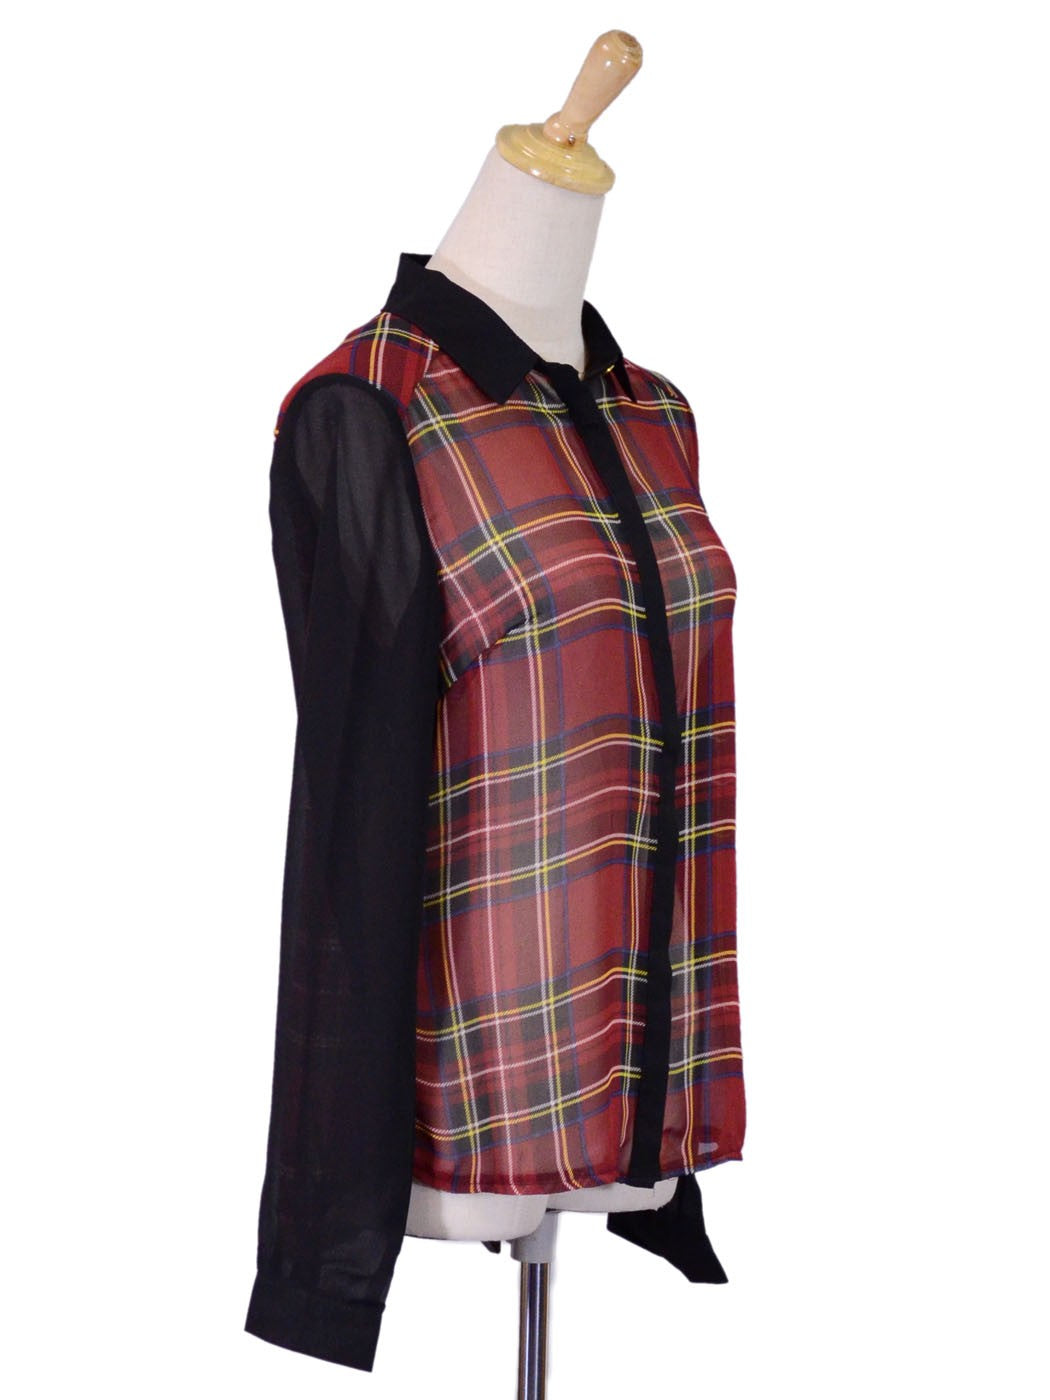 Oxford Circus Preppy Plaid Checker Sheer Long Sleeves Color Blouse Top